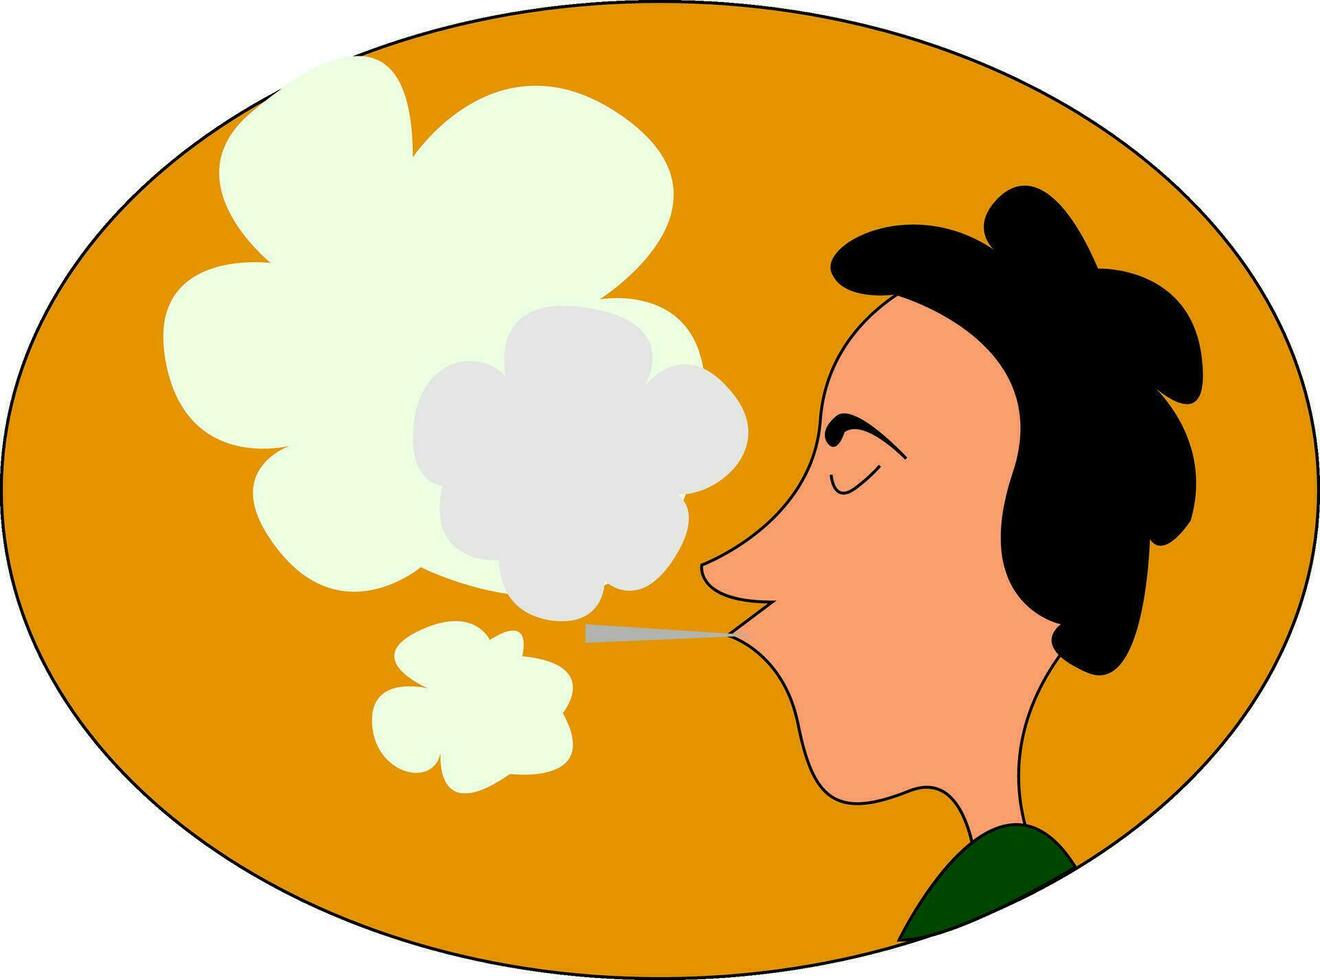 A smoking man, vector or color illustration.